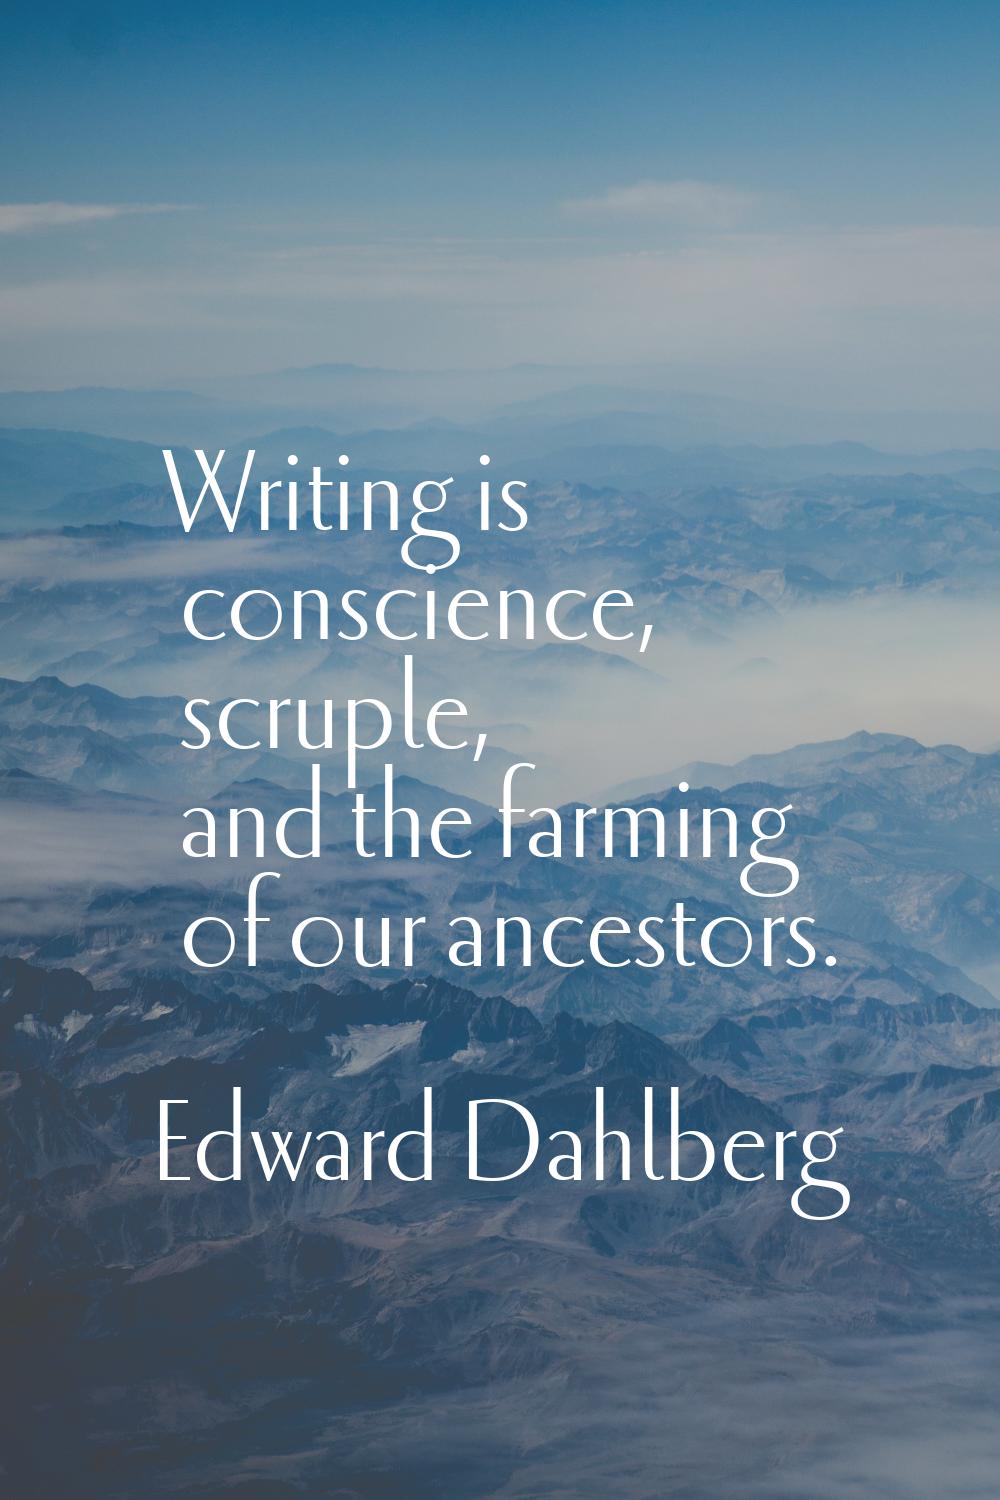 Writing is conscience, scruple, and the farming of our ancestors.